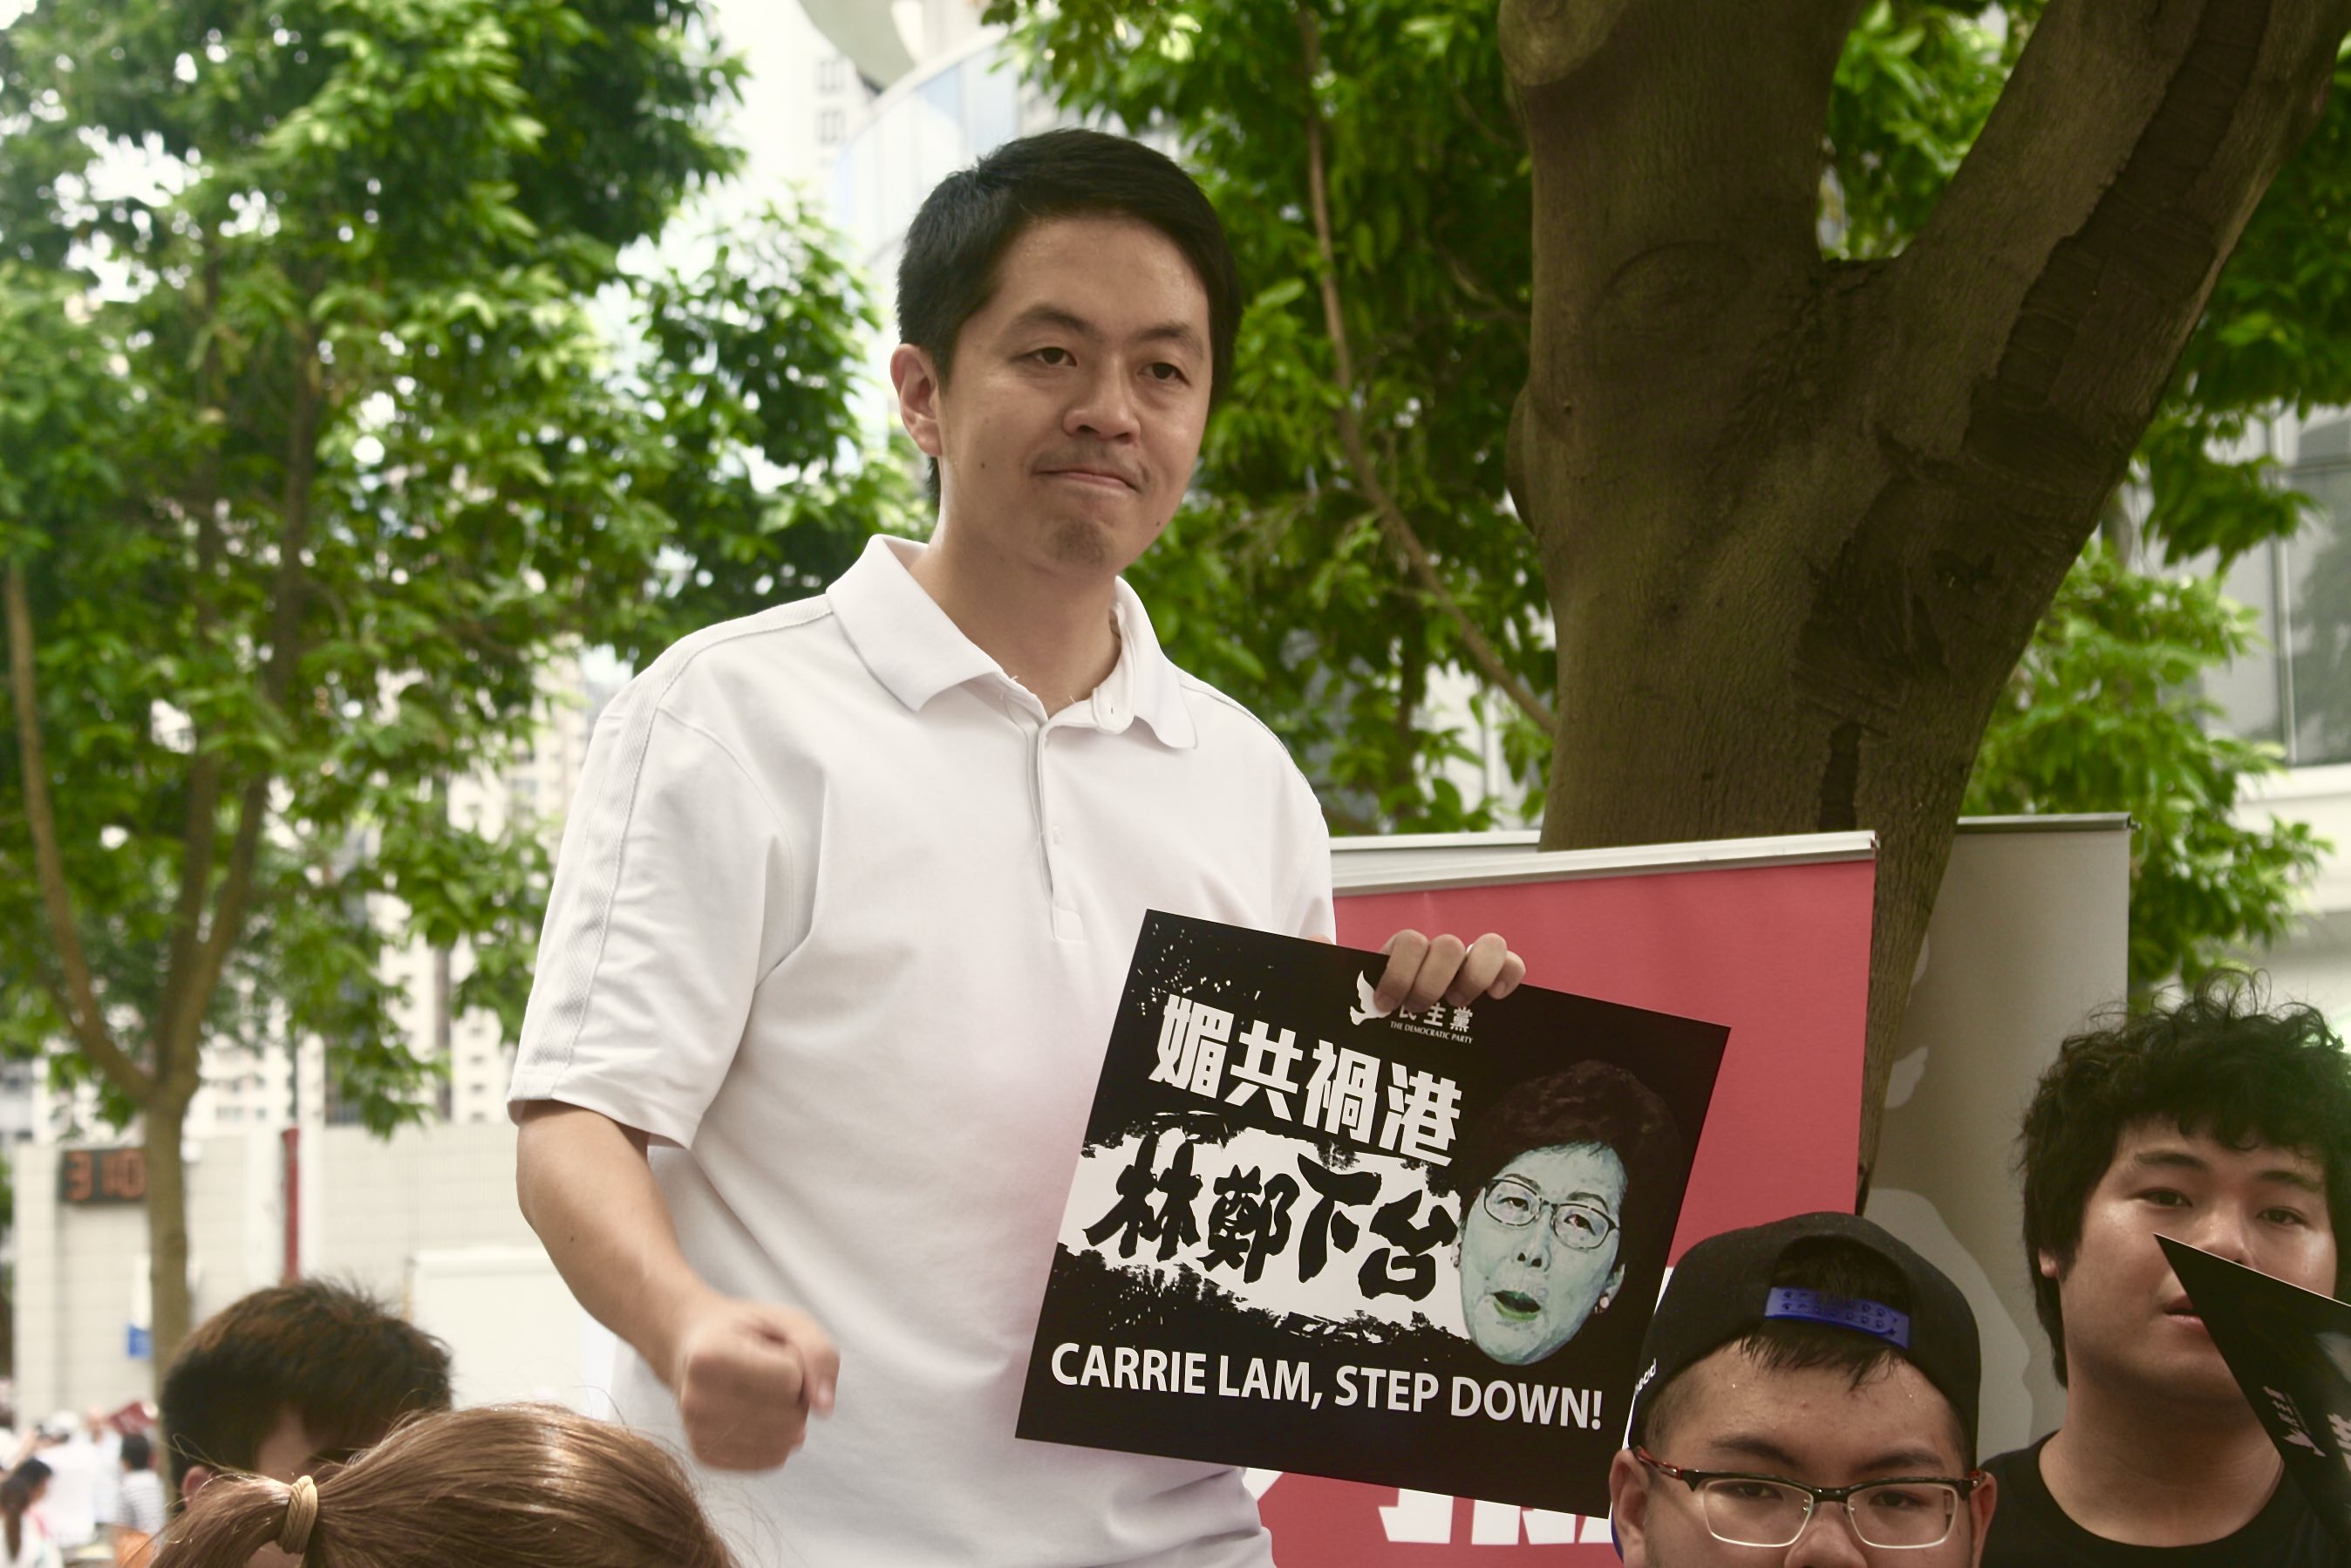 Ted Hui greeting protesters taking part in the anti-extradition bill march on June 9, 2019. Photo by Vicky Wong.